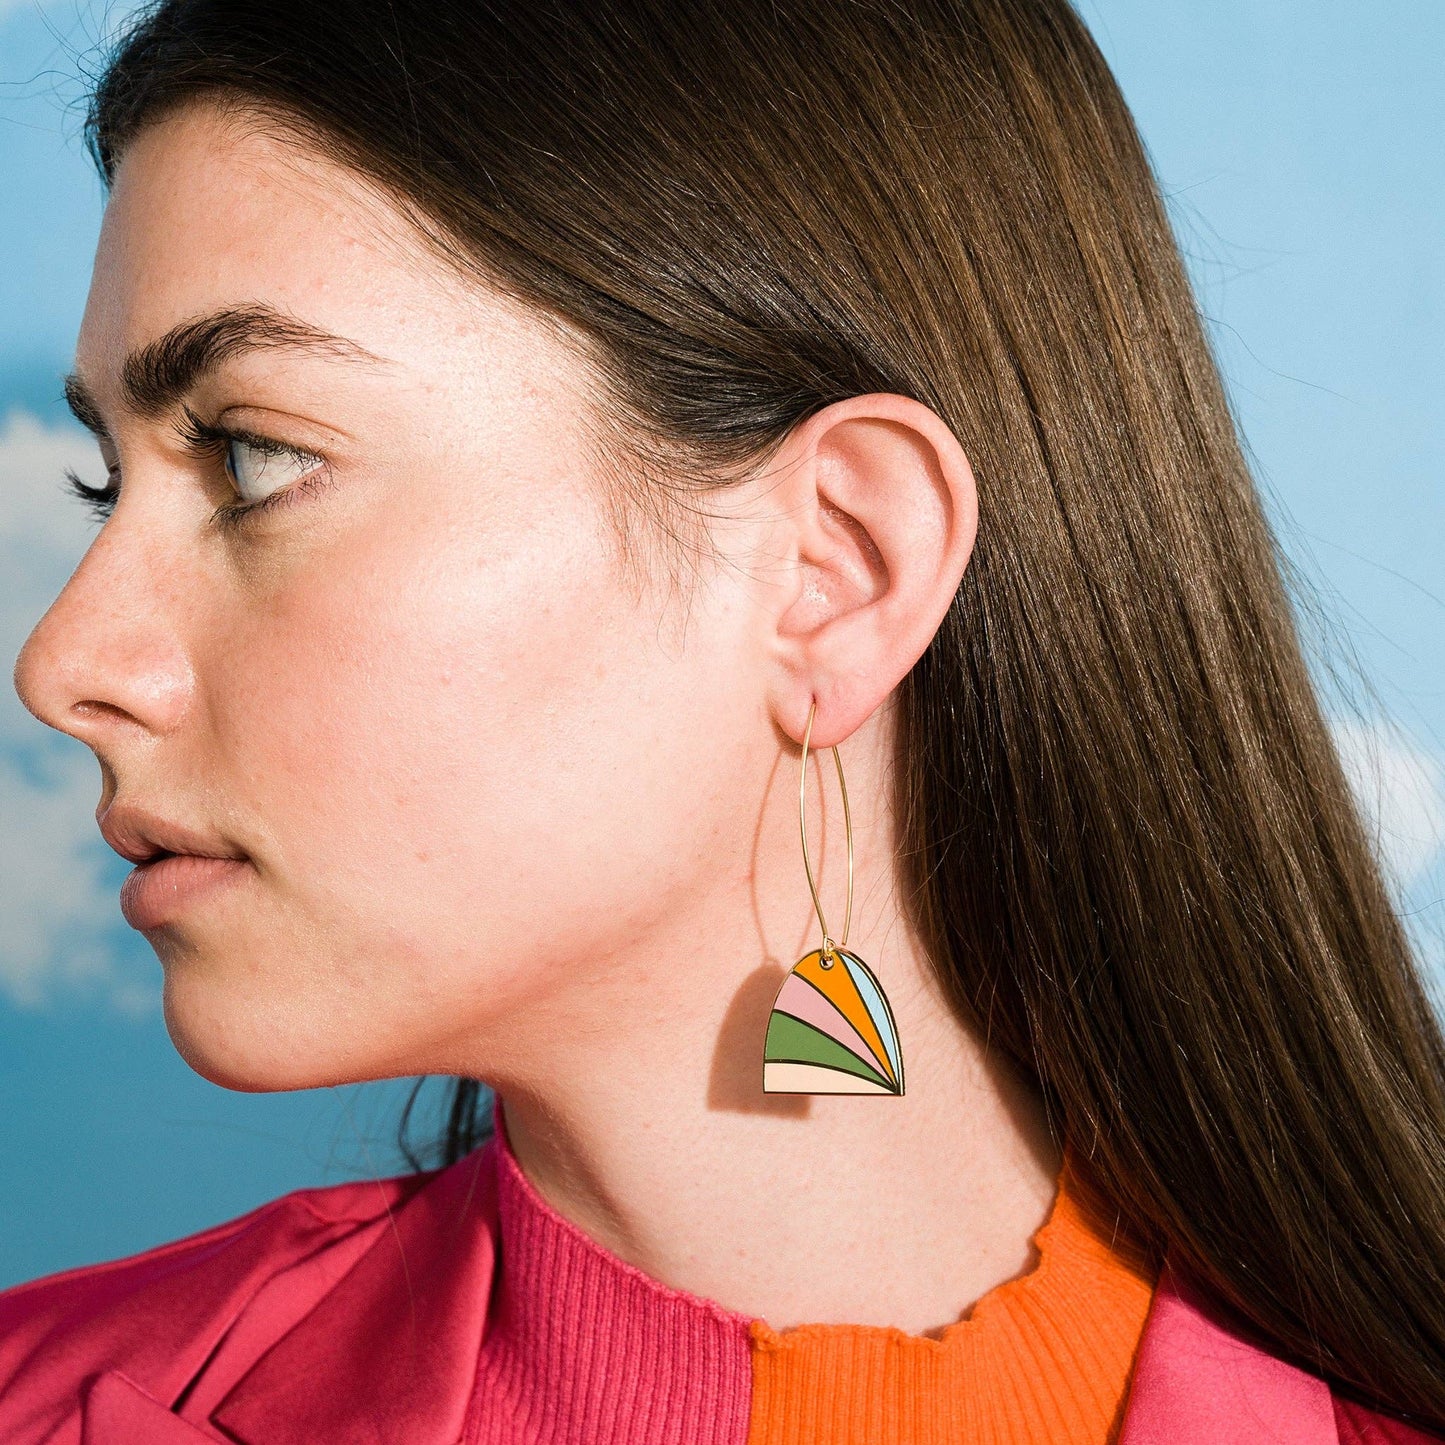 Larissa Loden - Zora Earrings  Larissa Loden   -better made easy-eco-friendly-sustainable-gifting